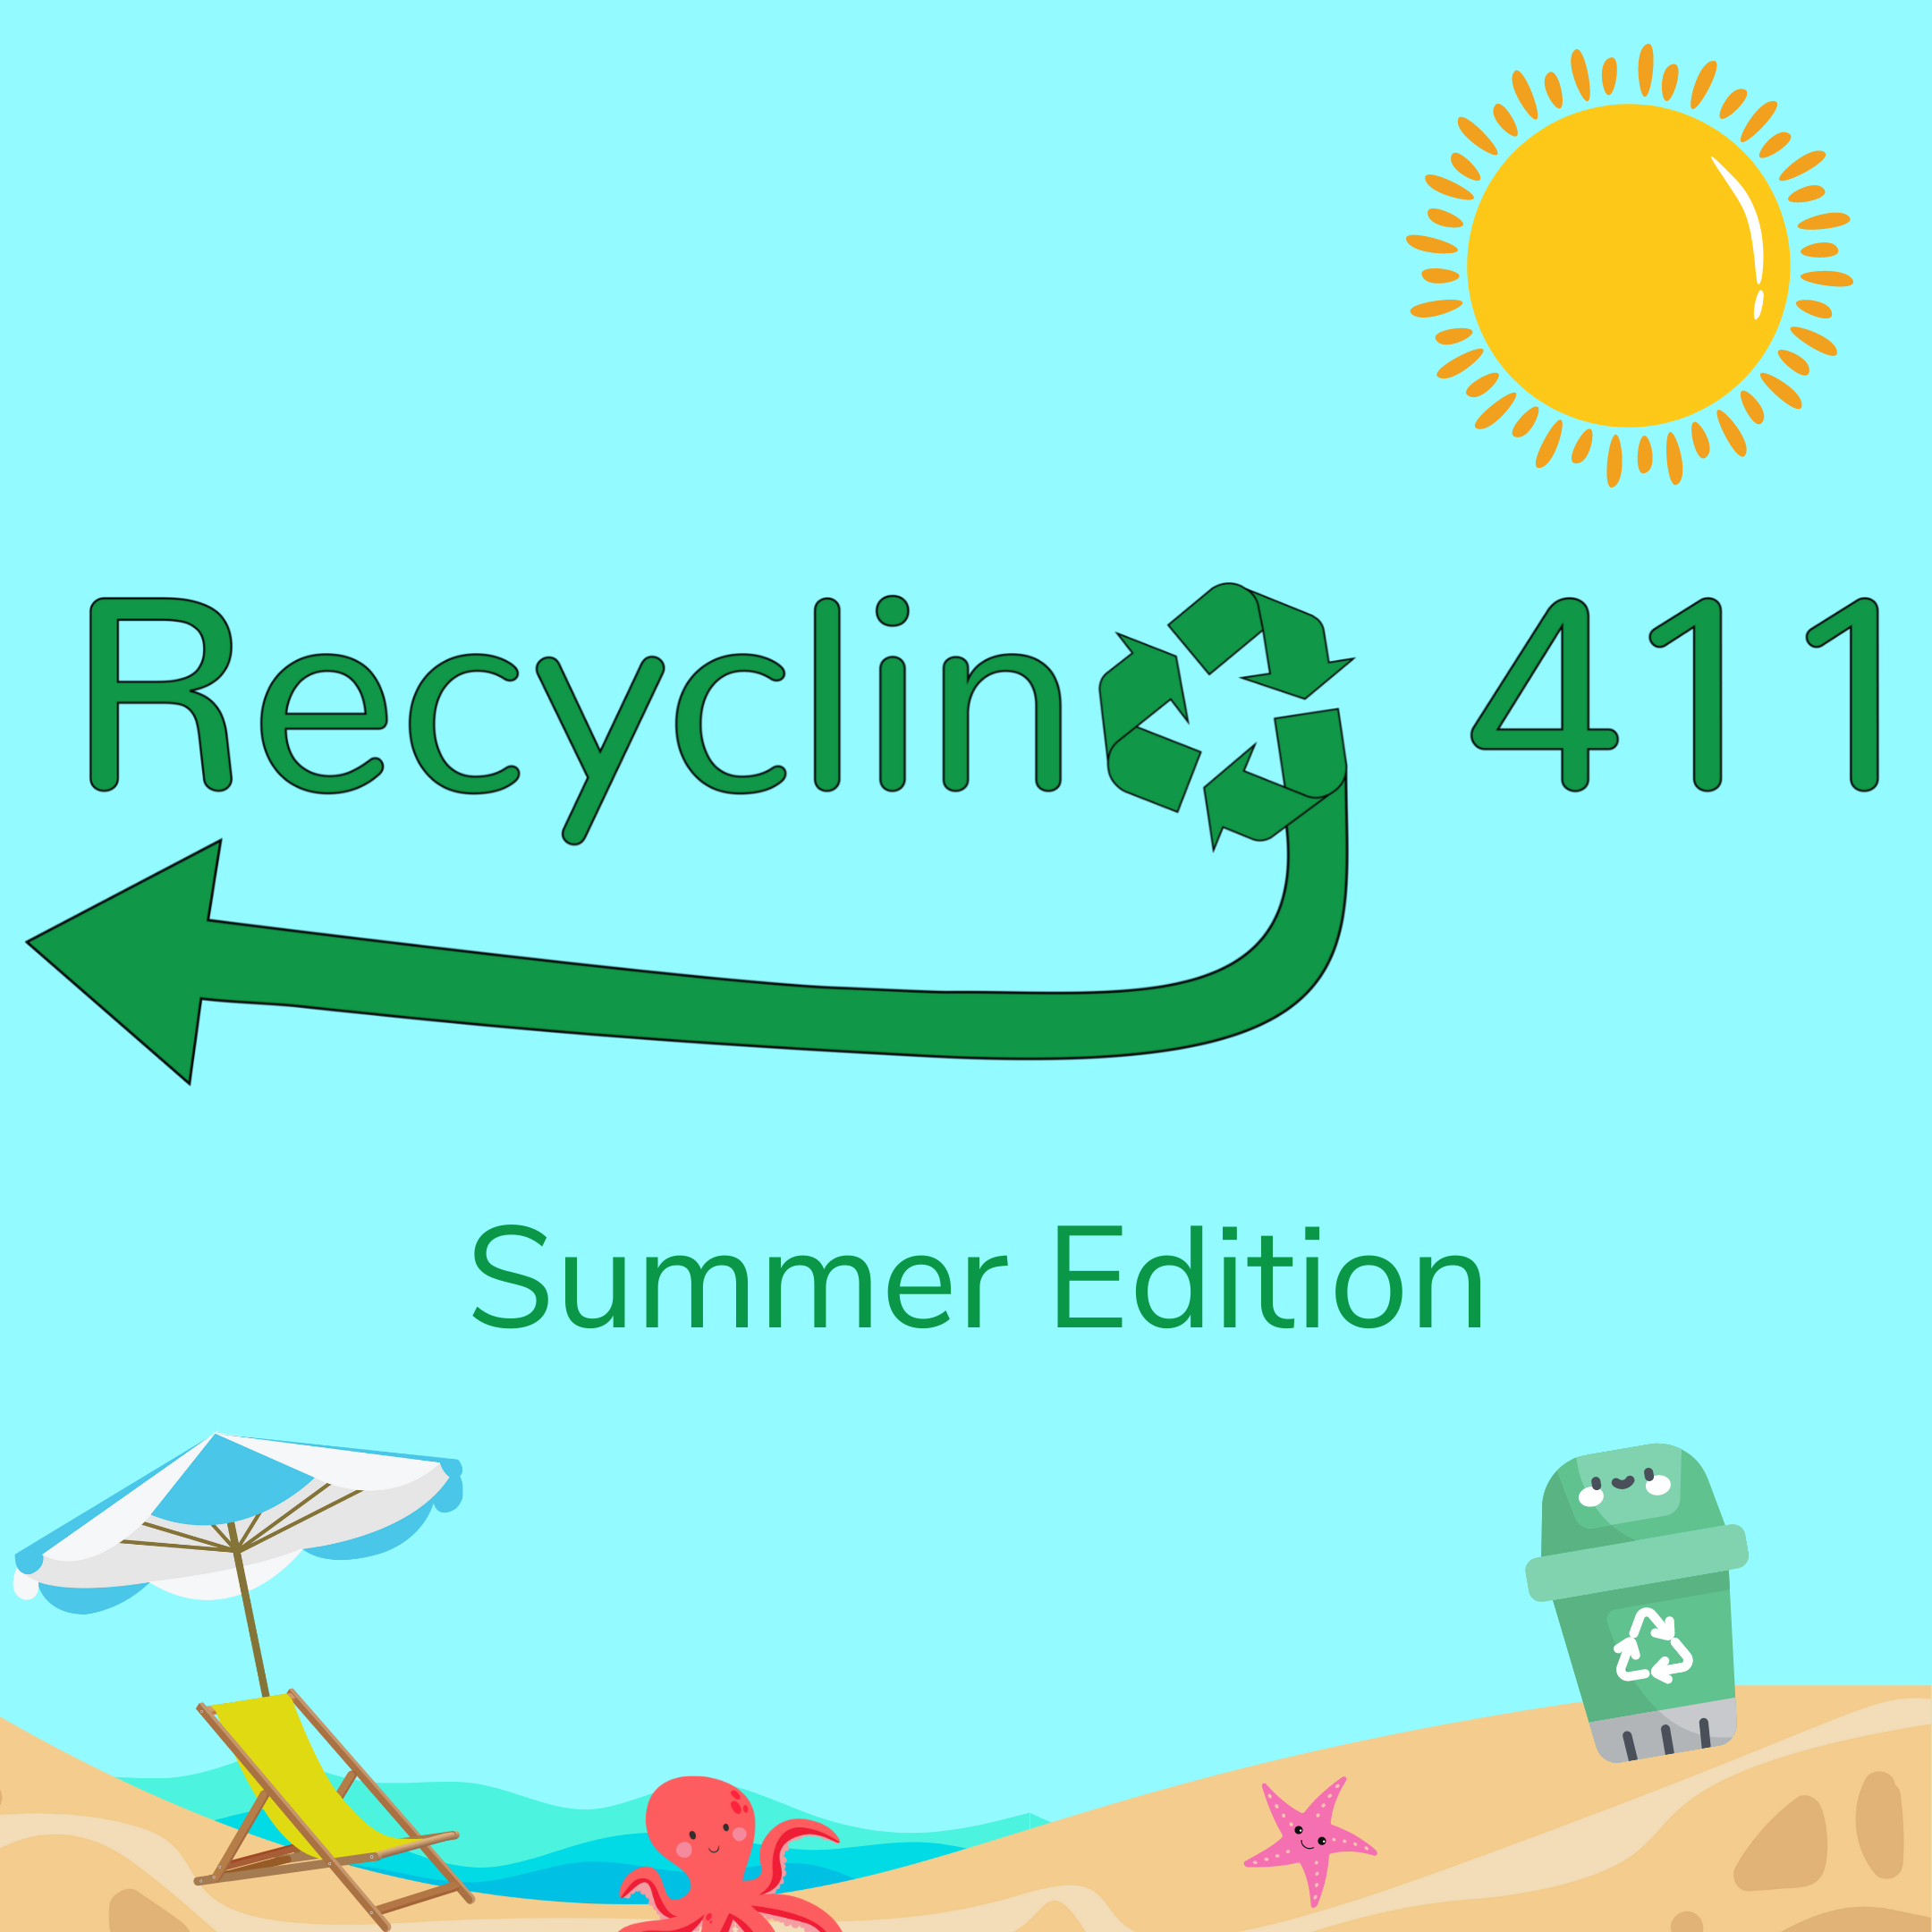 Recycling 411 Summer Edition Final